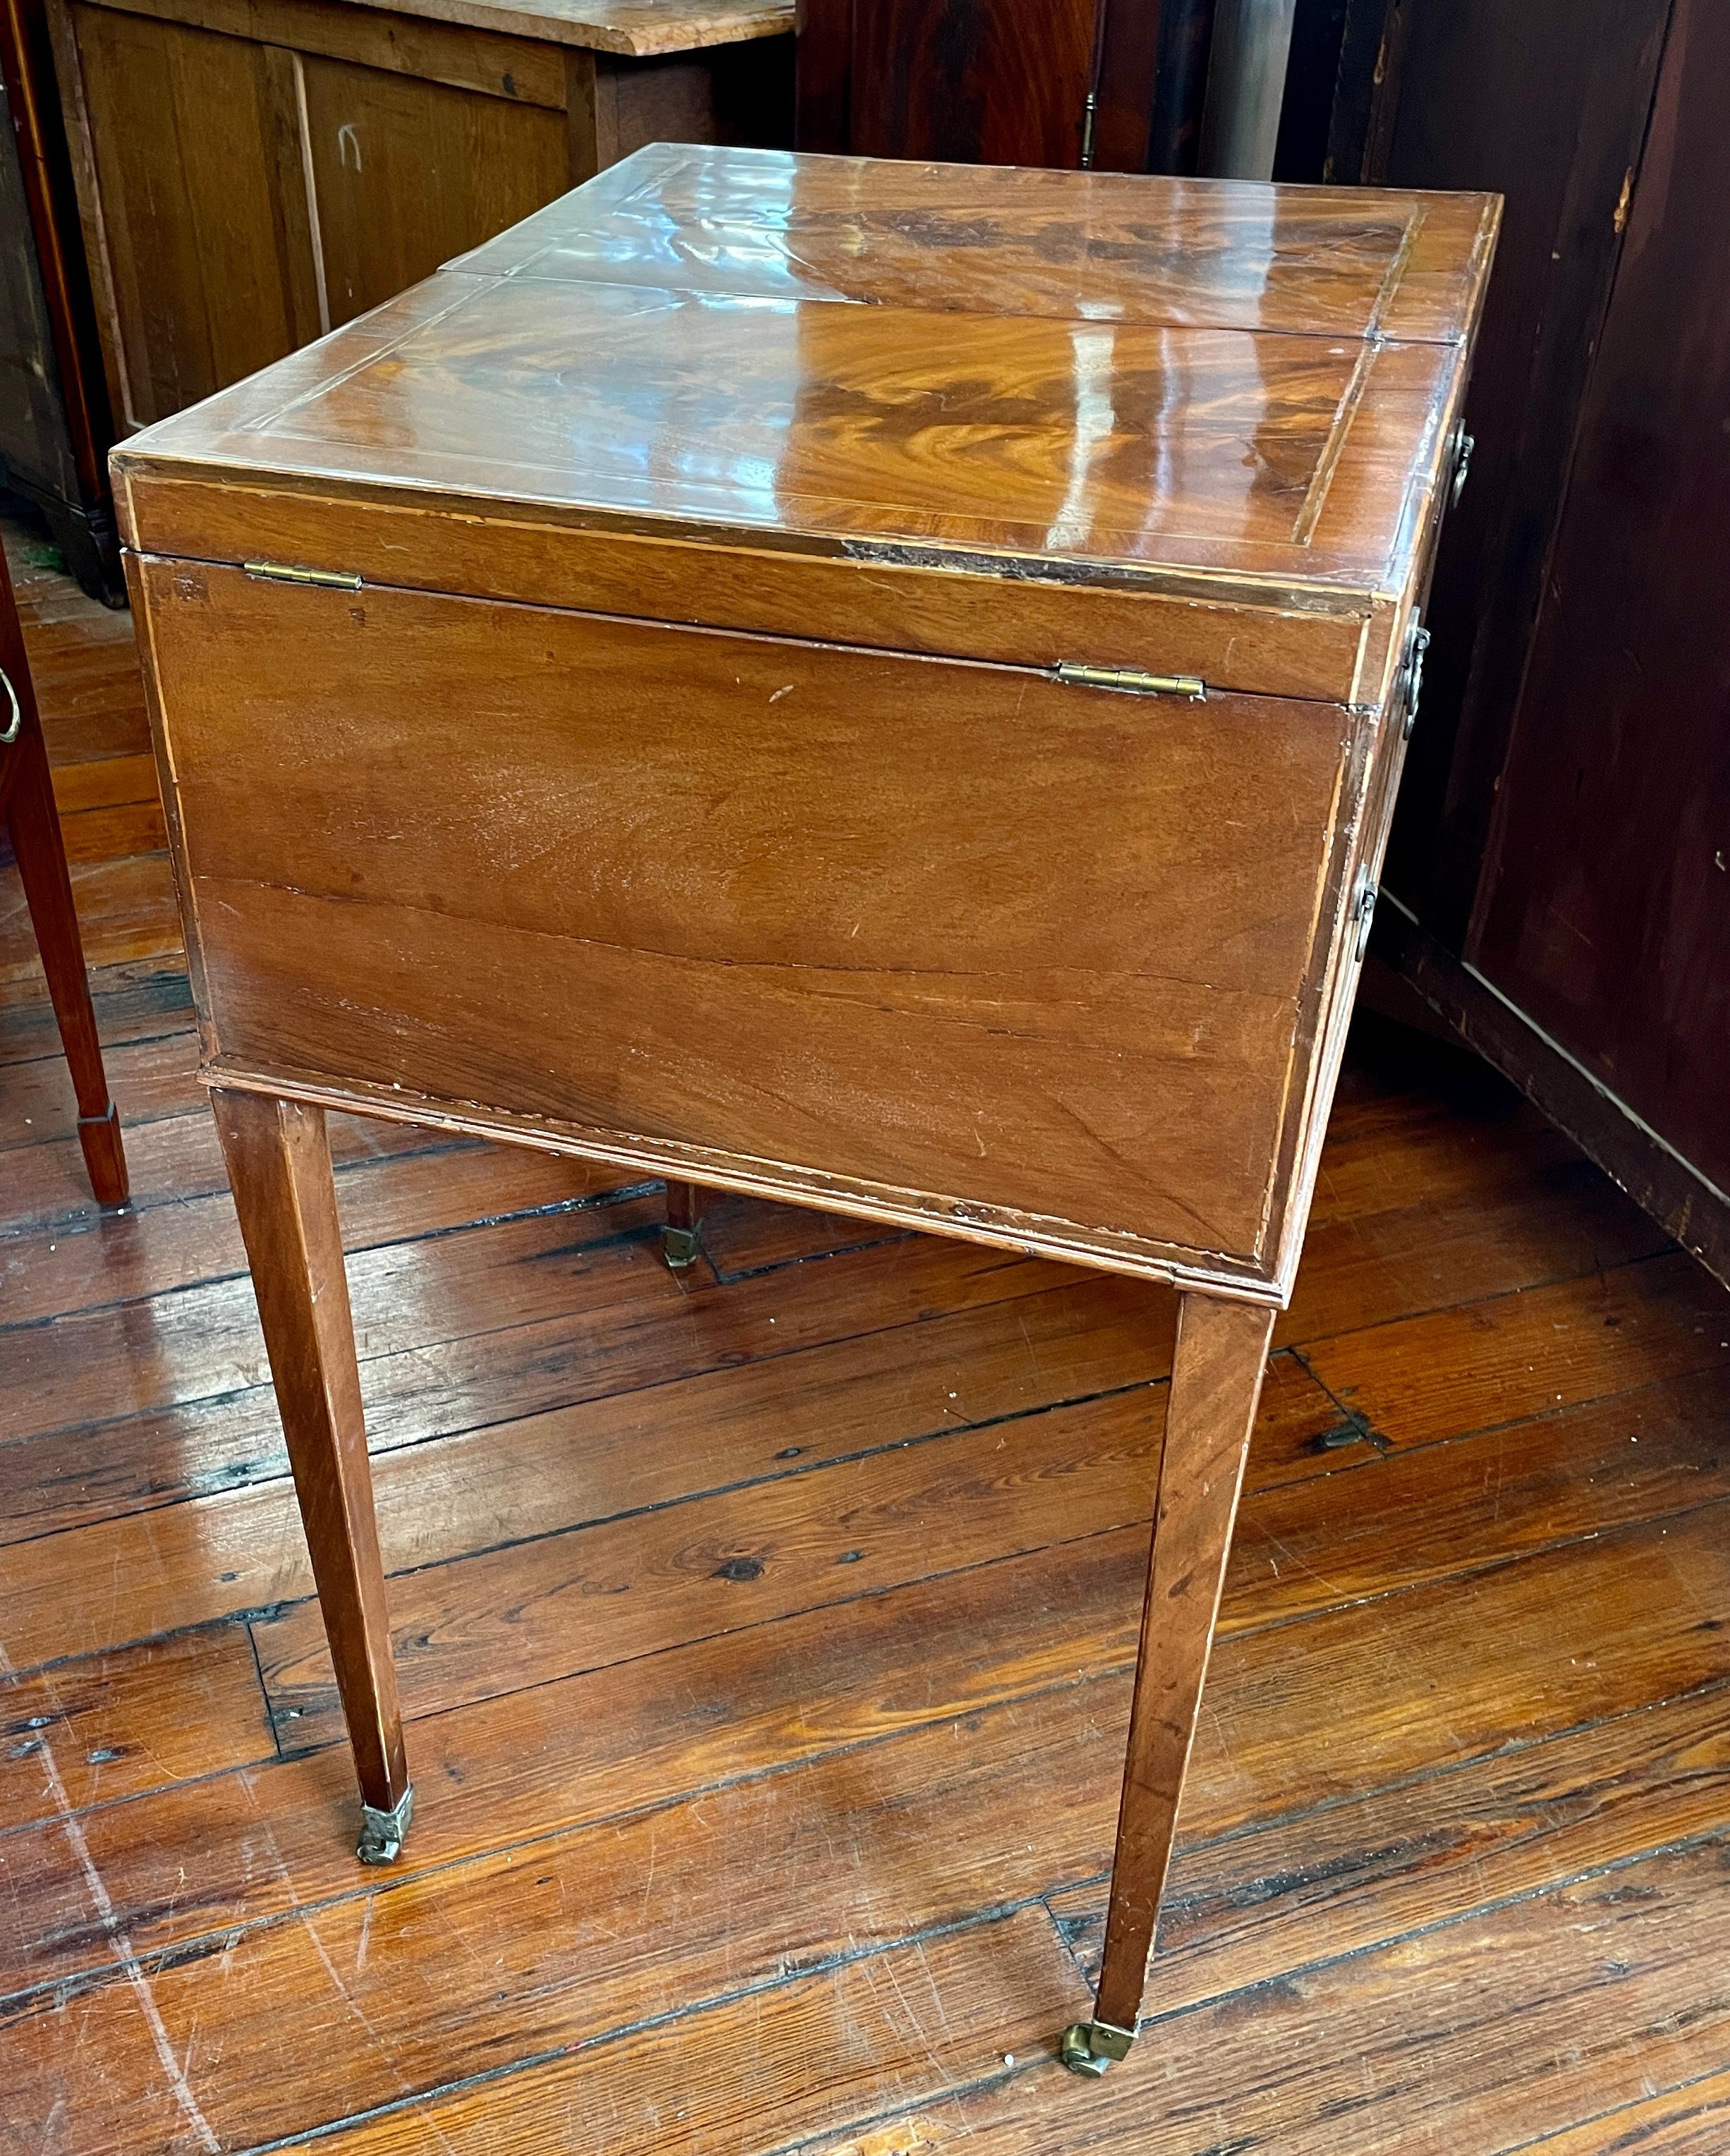 Fabulous quality rare and important antique English George III inlaid flame mahogany Gentleman's Dressing Table or Beau Brummel. 
This table comes with an exceptionally well fitted interior with the carved bone knobs; original ratchet adjustable